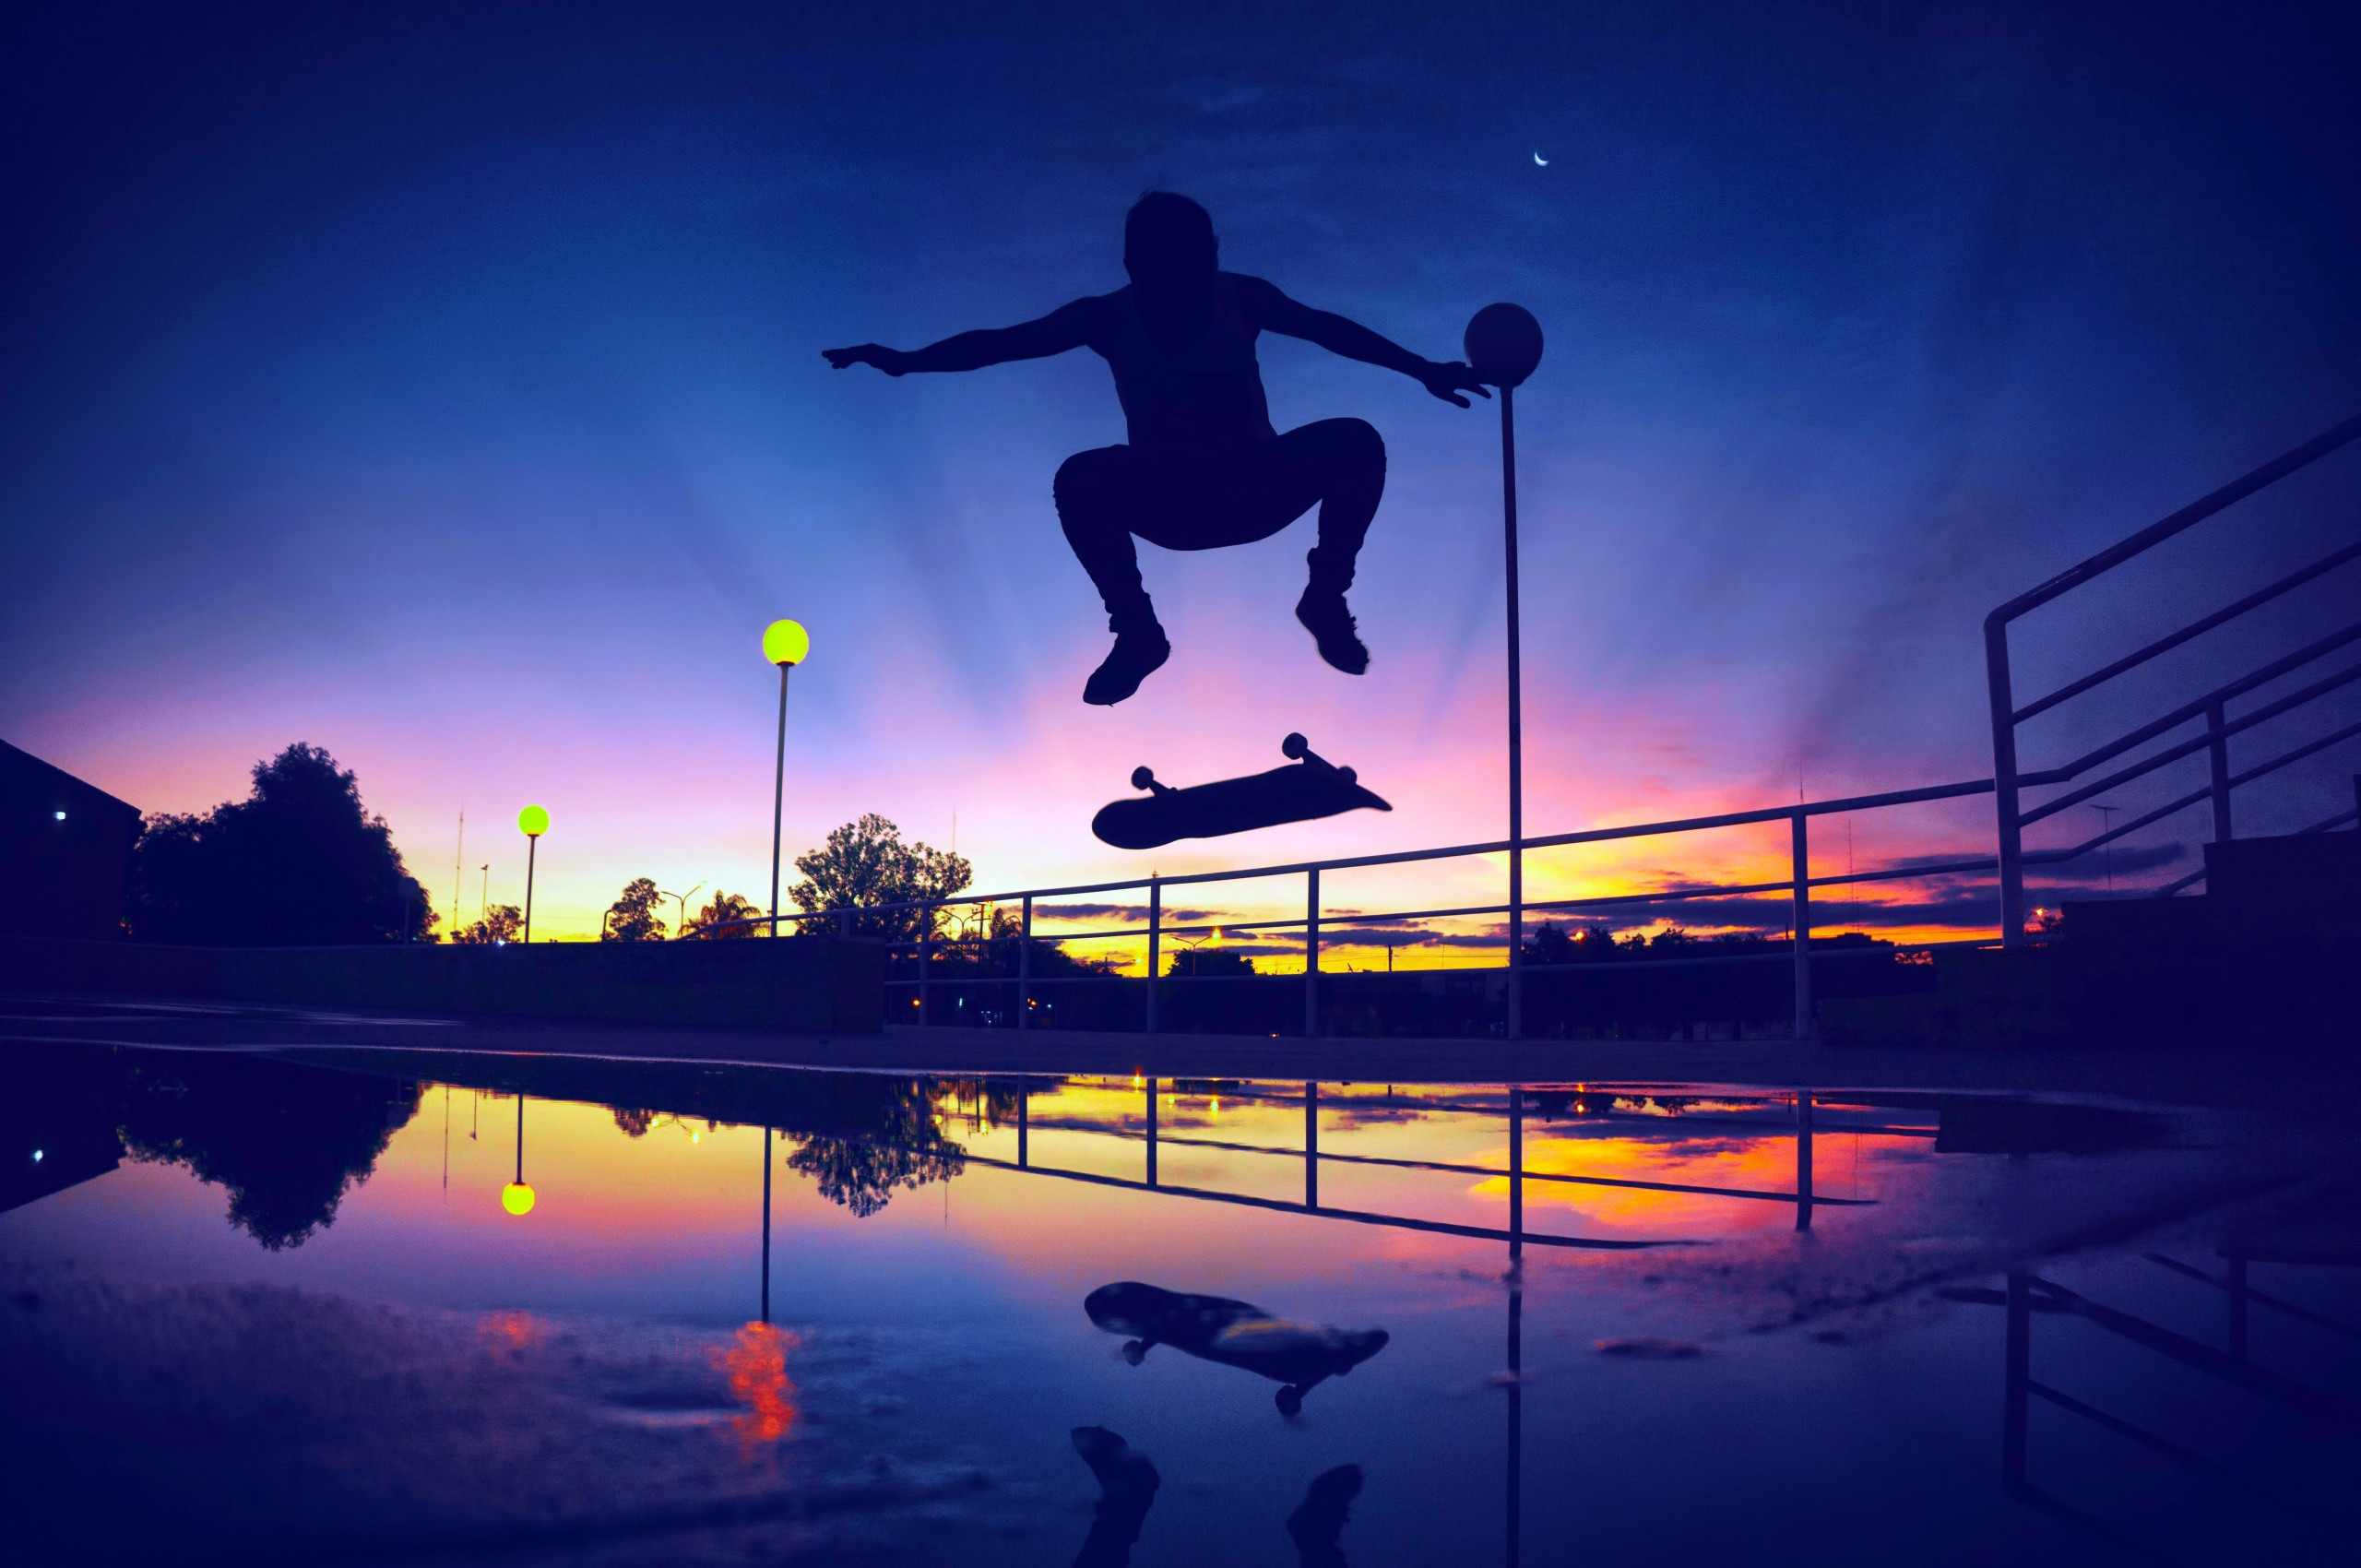 Download 2560x1700 Sunset, Skate, Jump, Silhouette, Reflection Wallpaper for Chromebook Pixel